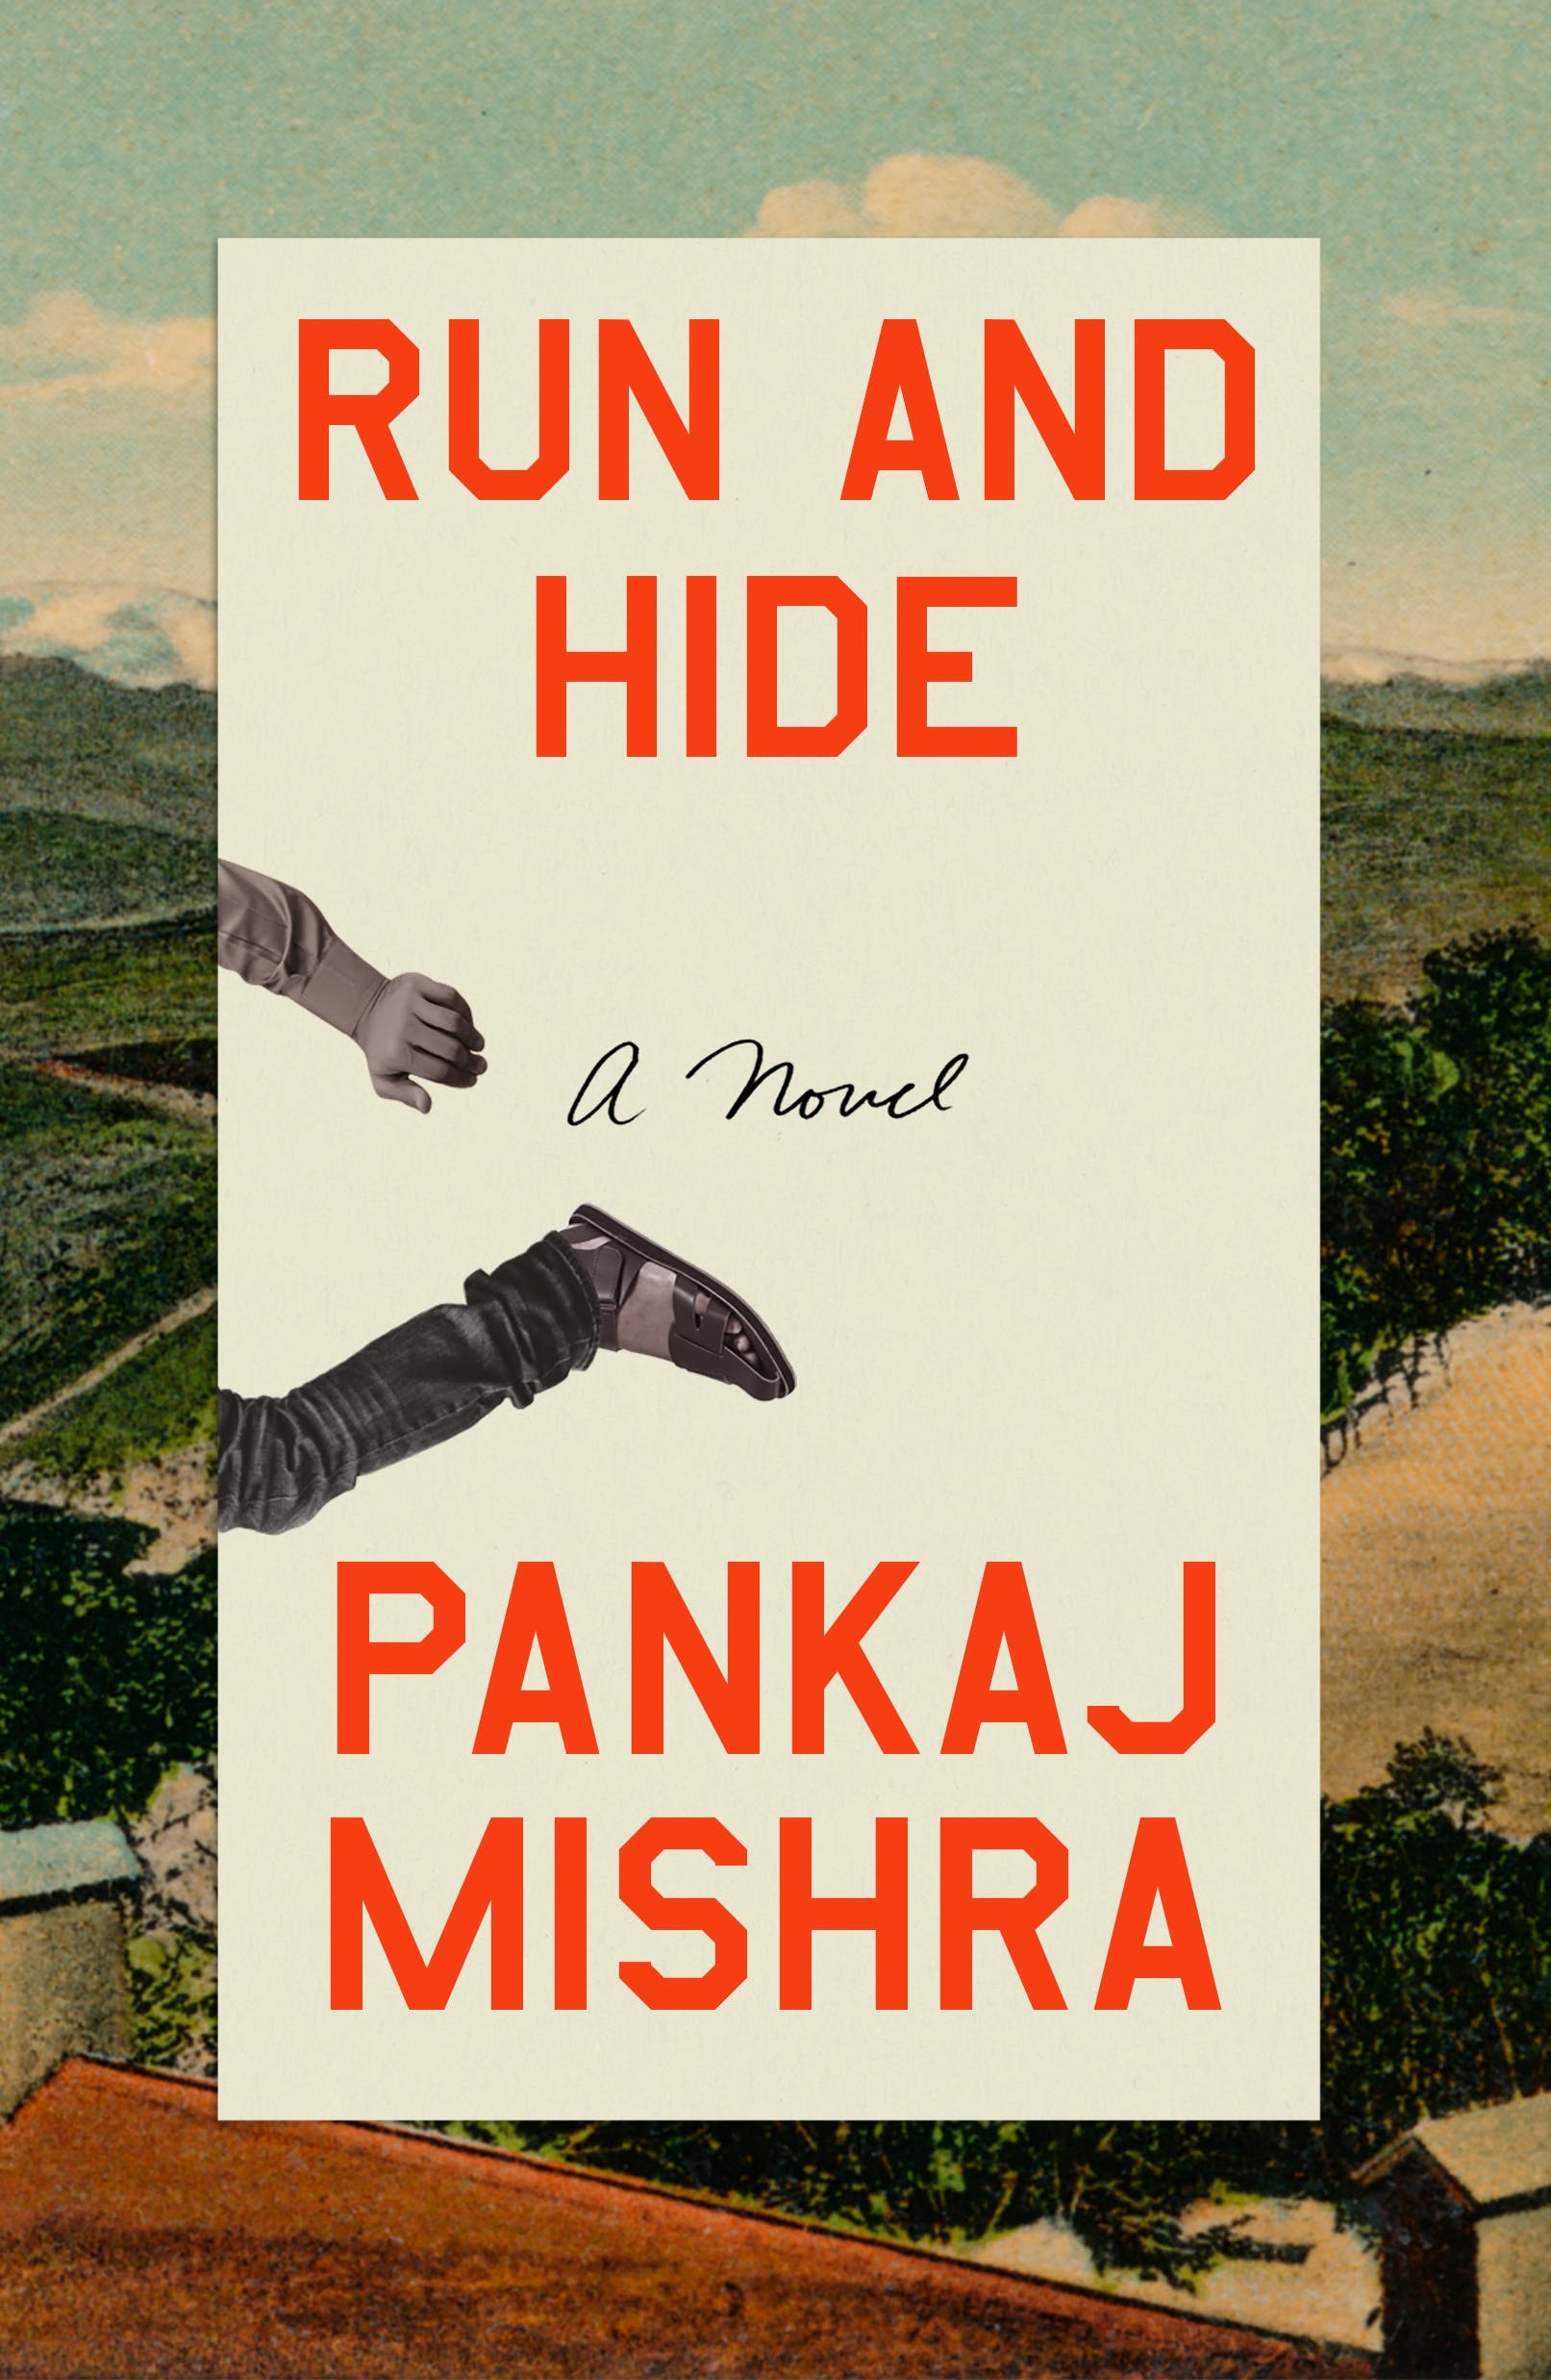 A compelling novel explores economic inequality in India today